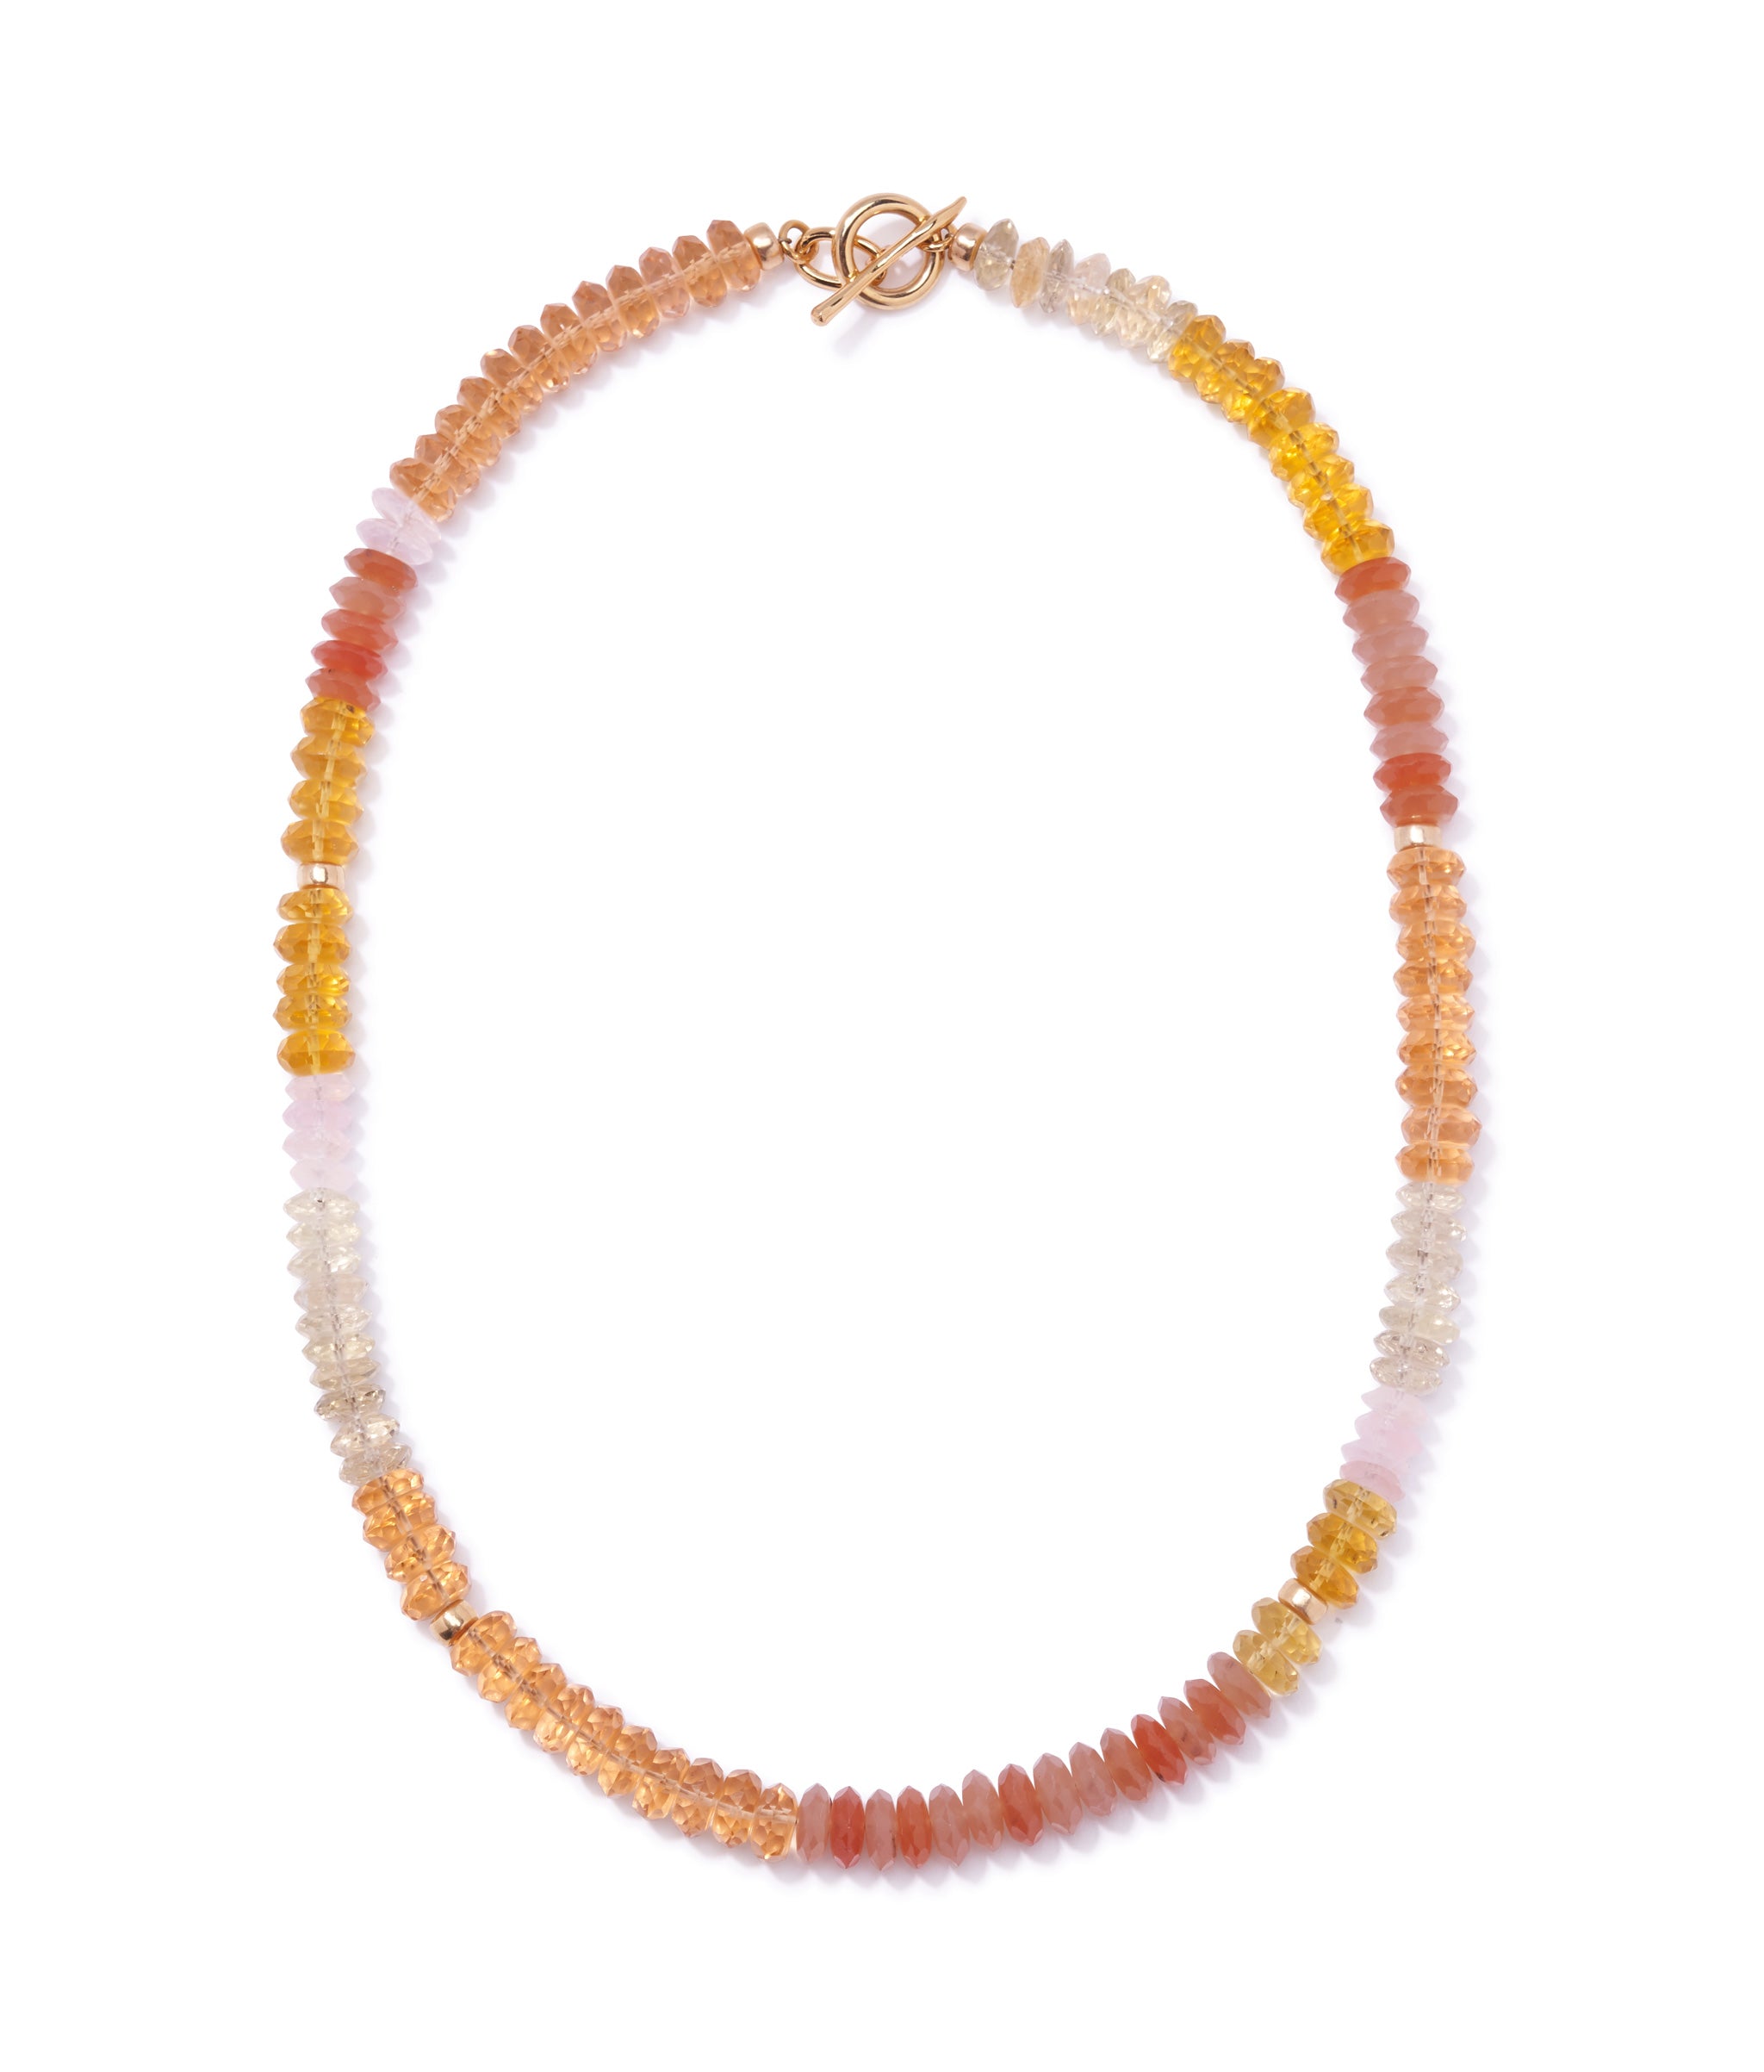 Selena Necklace in Sunrise. Single strand necklace of small faceted quartz beads in orange-pink ombre colors.